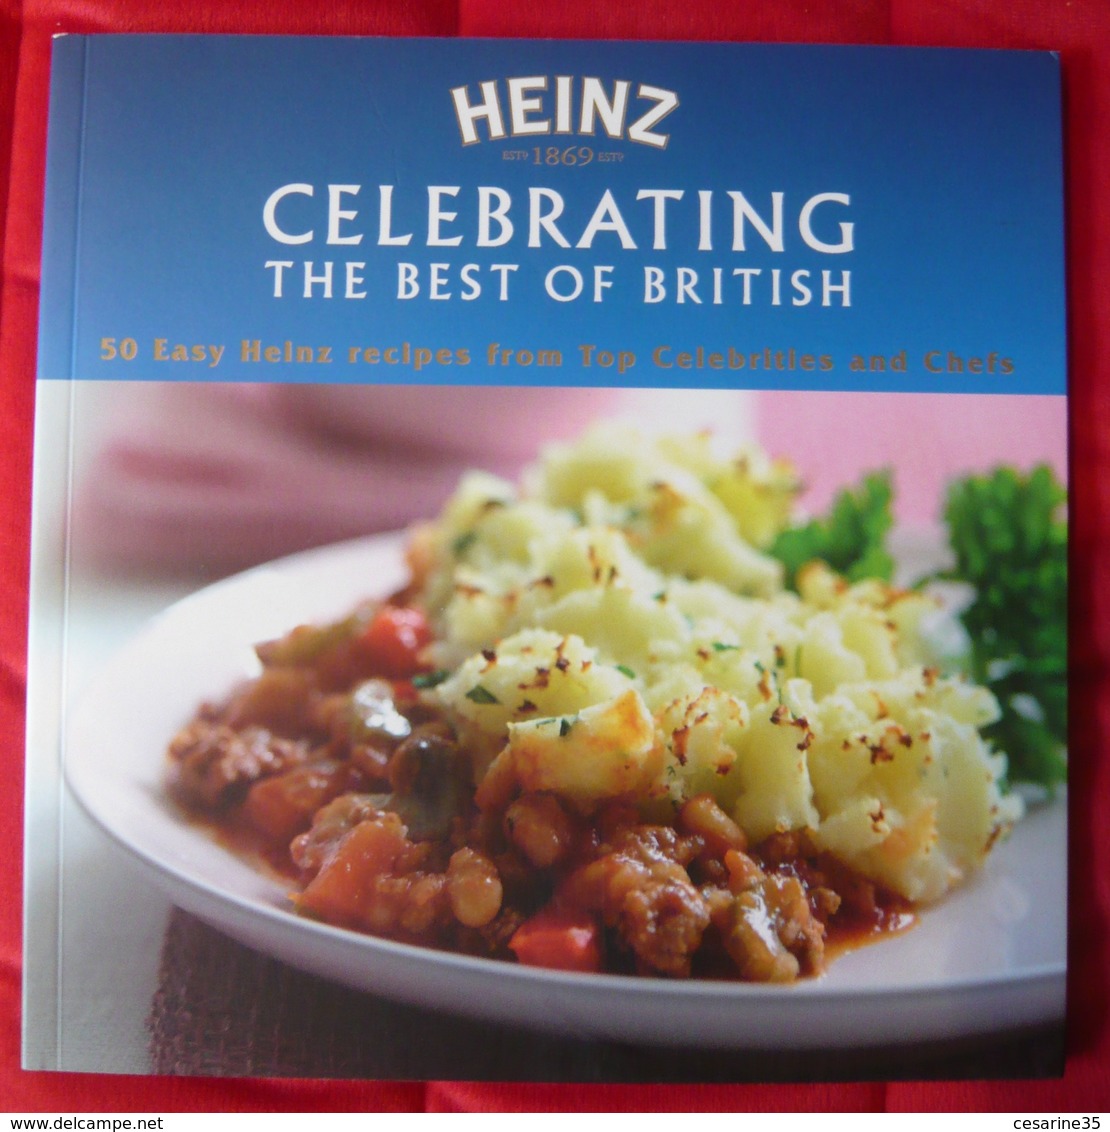 Heinz Celebrating The Best Of British – 50 Easy Heinz Recipes From Top Celebrities And Chefs - British